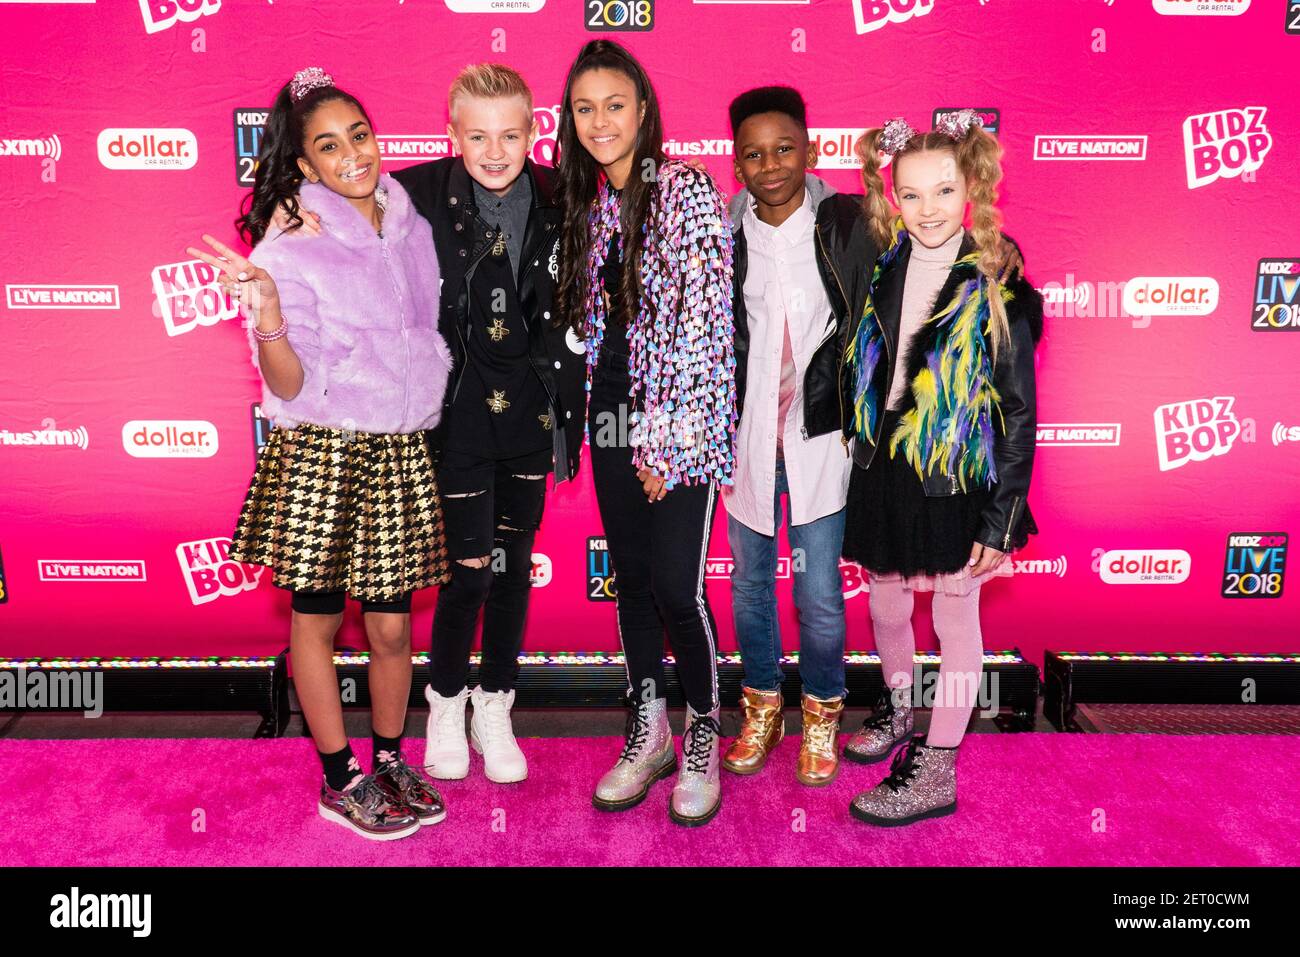 Lois, Max, Twinkle, Ashton and Mia attends the KIDZ BOP Pink